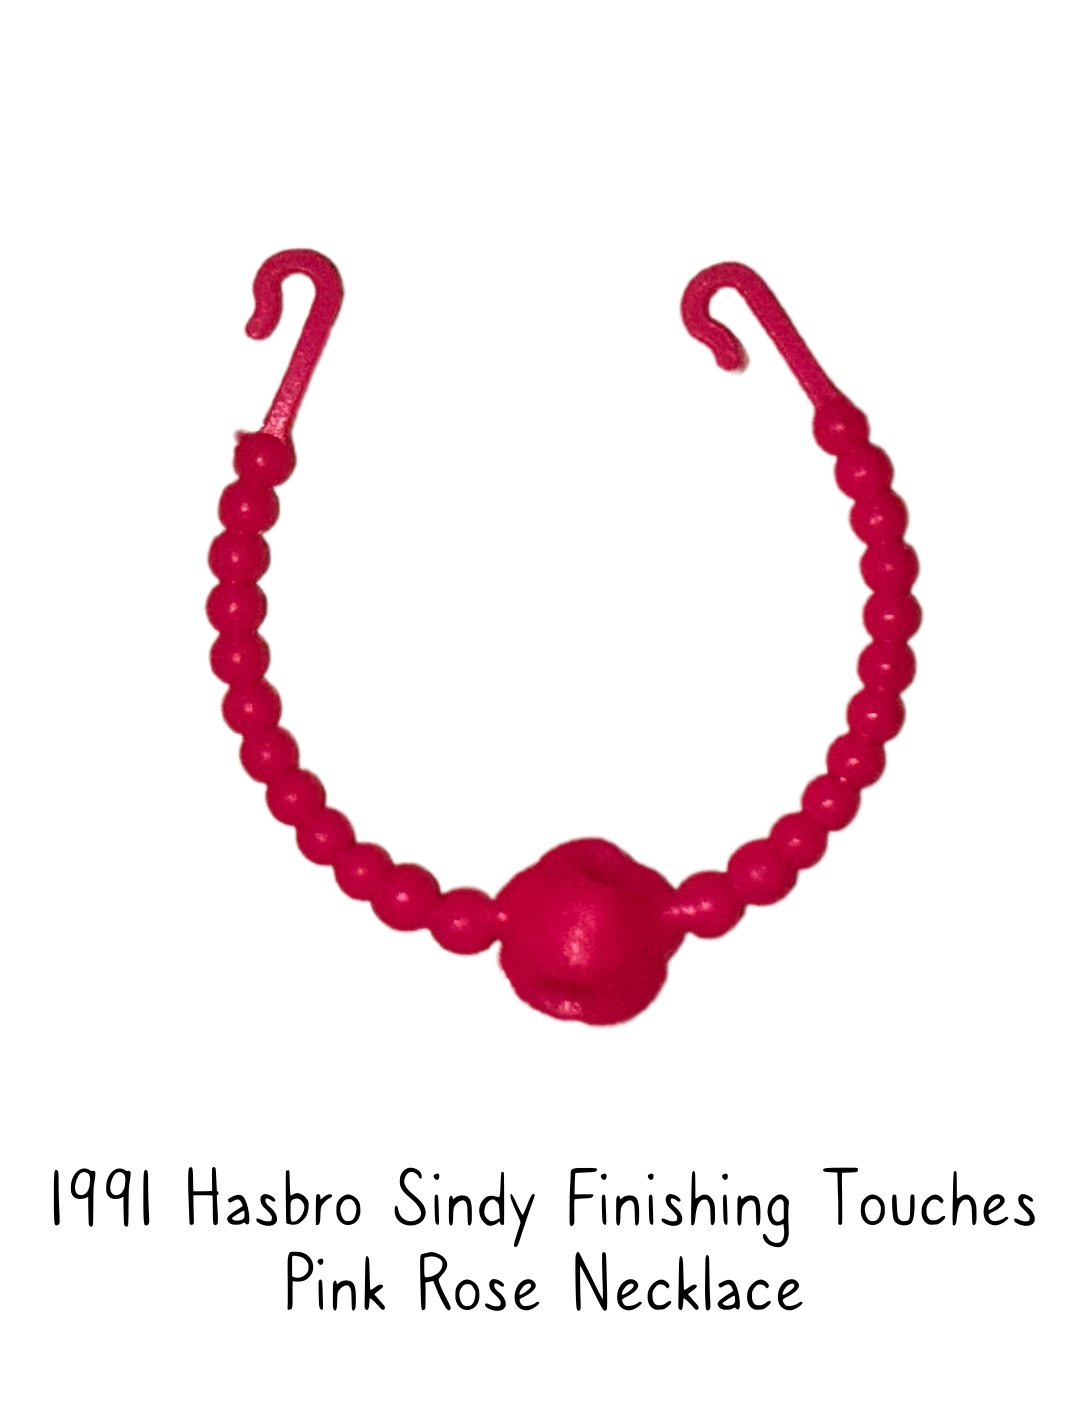 1991 Hasbro Sindy Finishing Touches Pink Rose Necklace